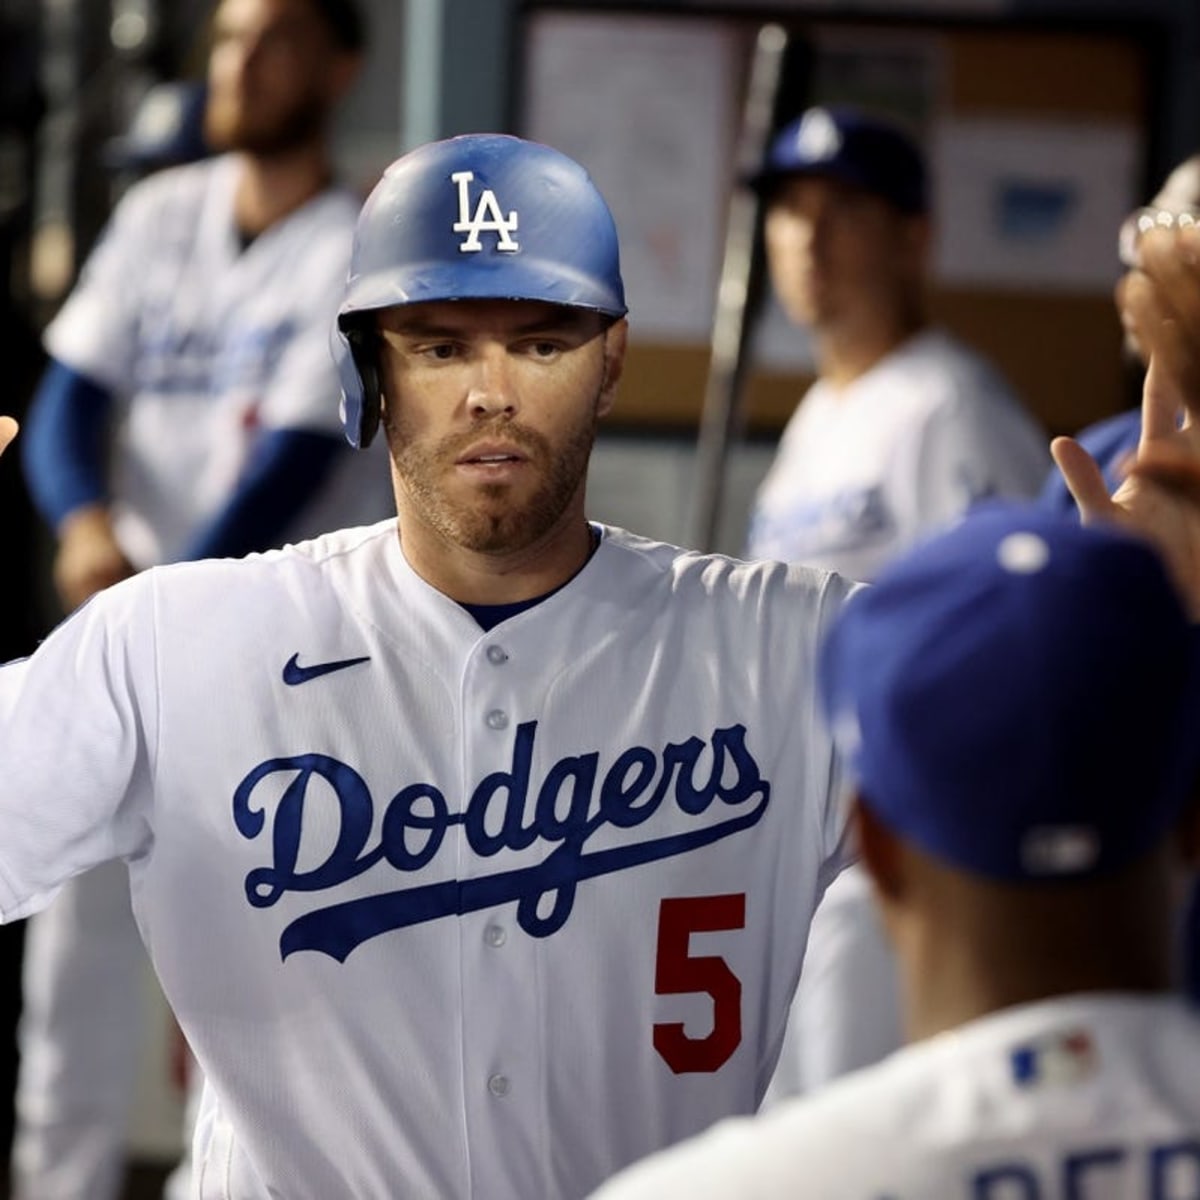 Dodgers at Giants Free Live Stream MLB Online, Channel - How to Watch and Stream Major League and College Sports